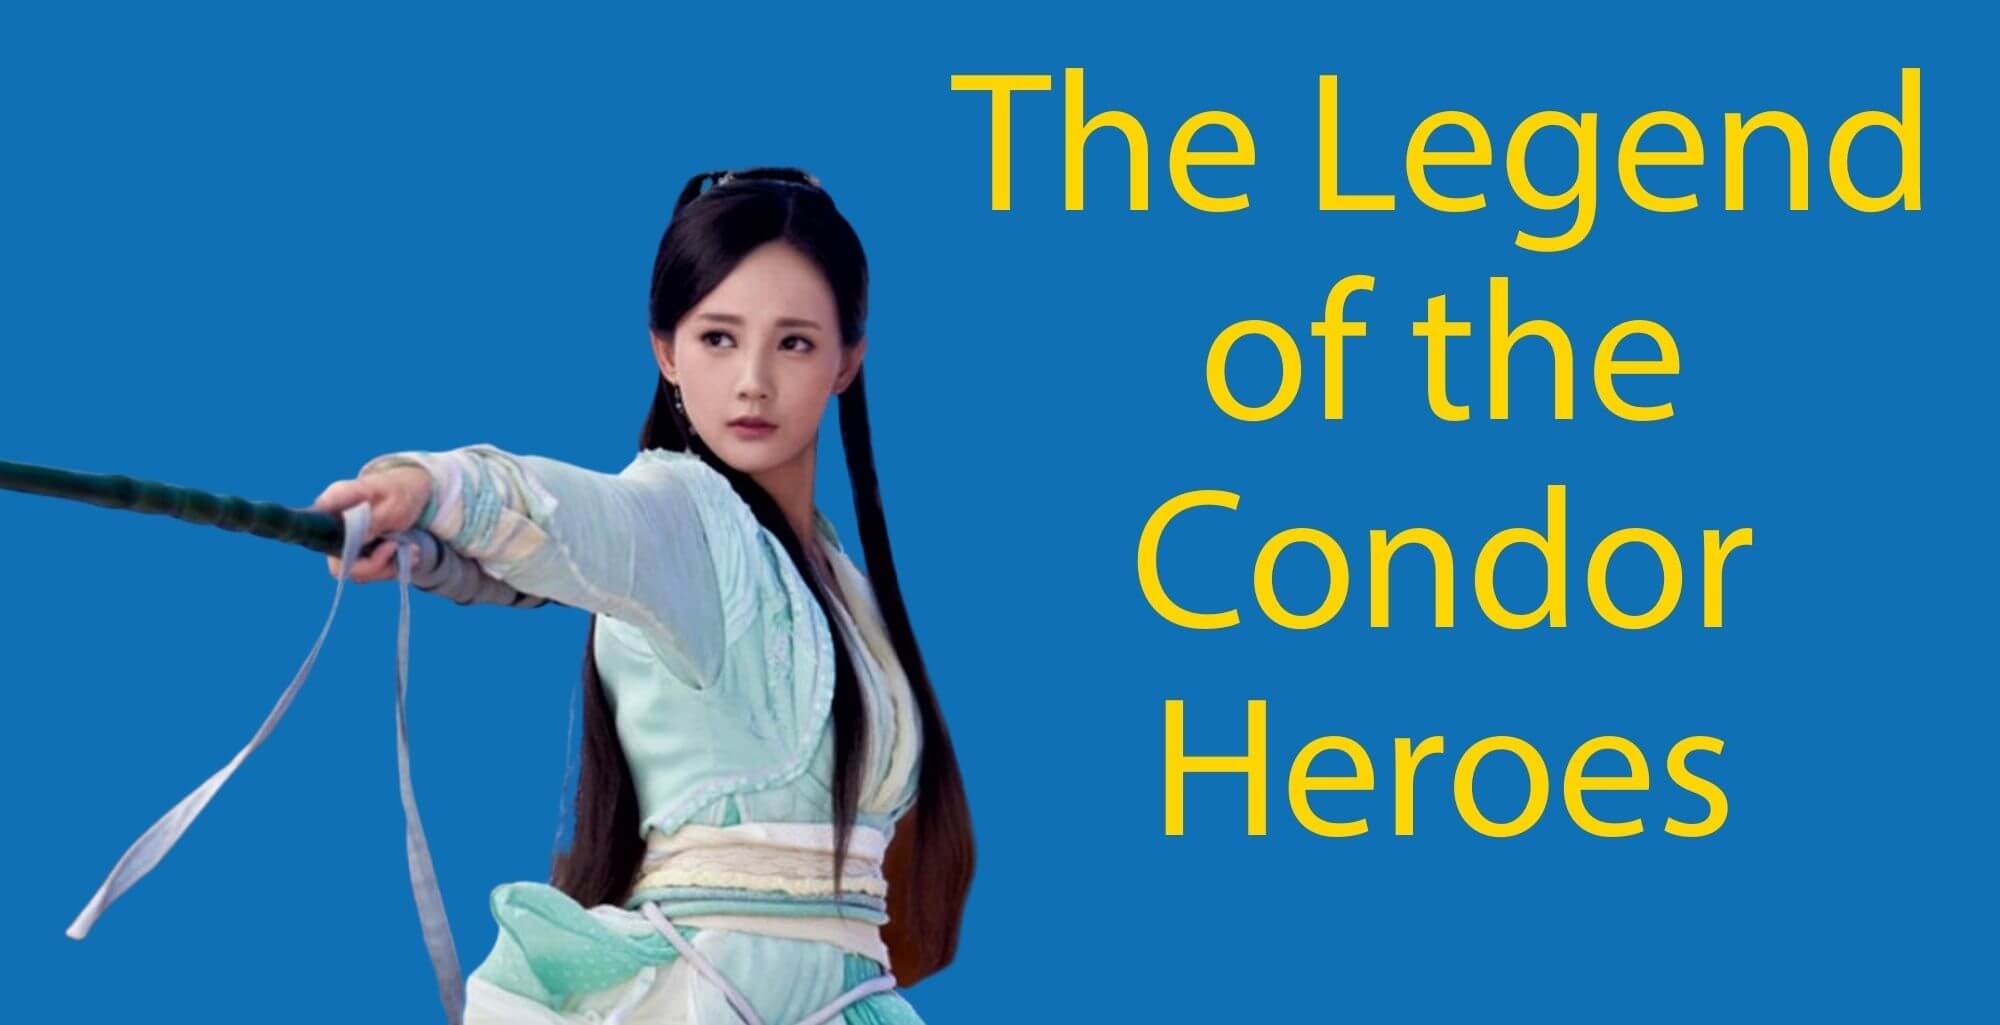 Louis Cha 'Jin Yong' novel Legends of the Condor Heroes Book Two